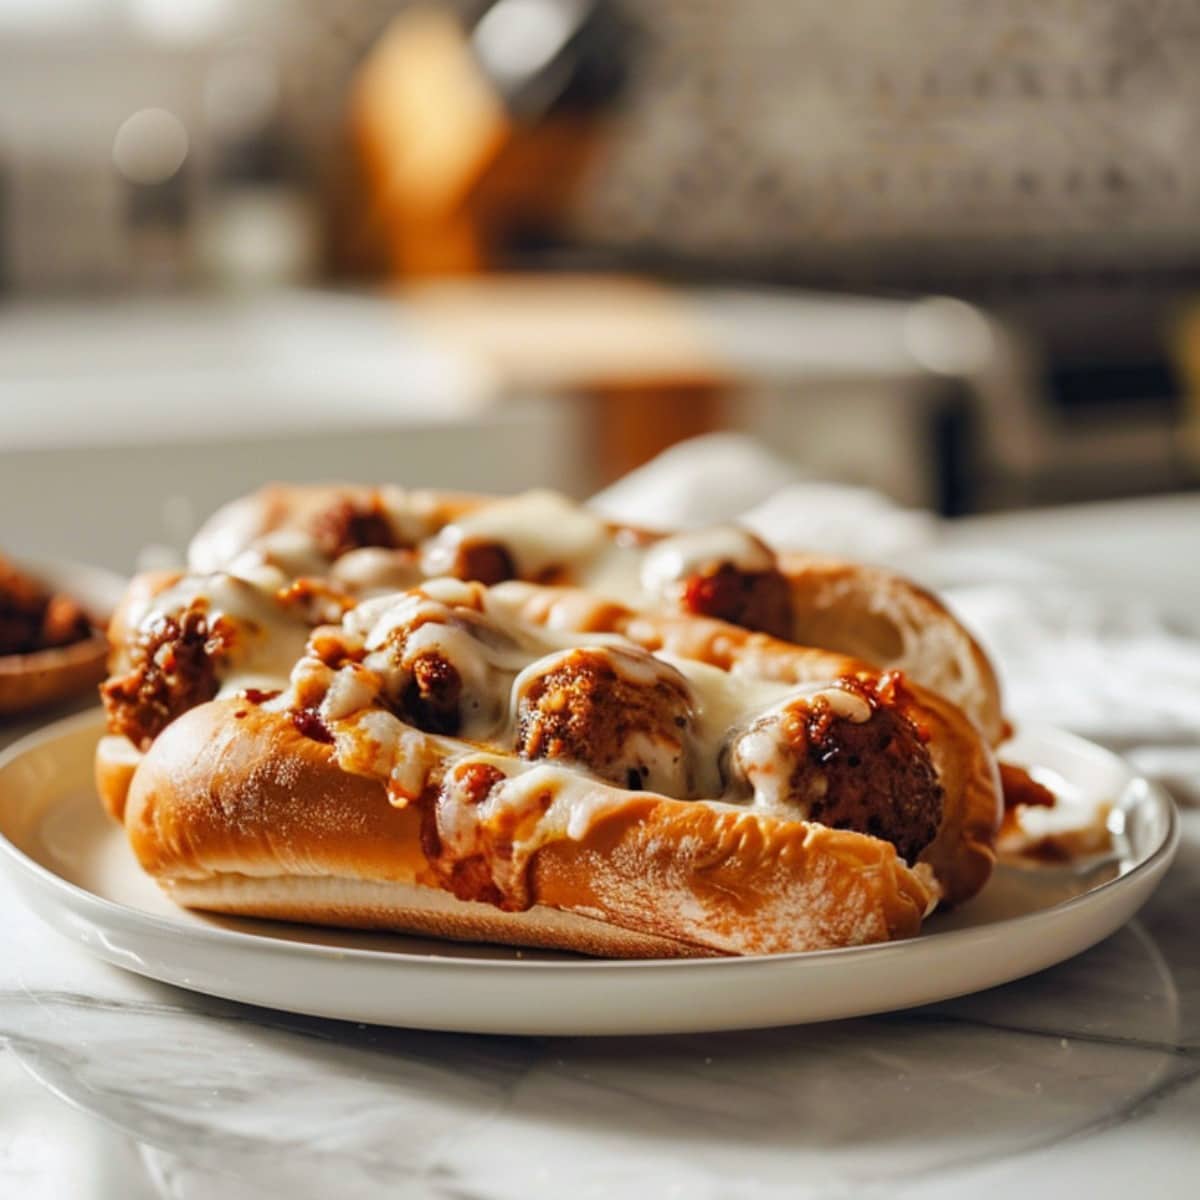 Two Meatball Subs on a Plate